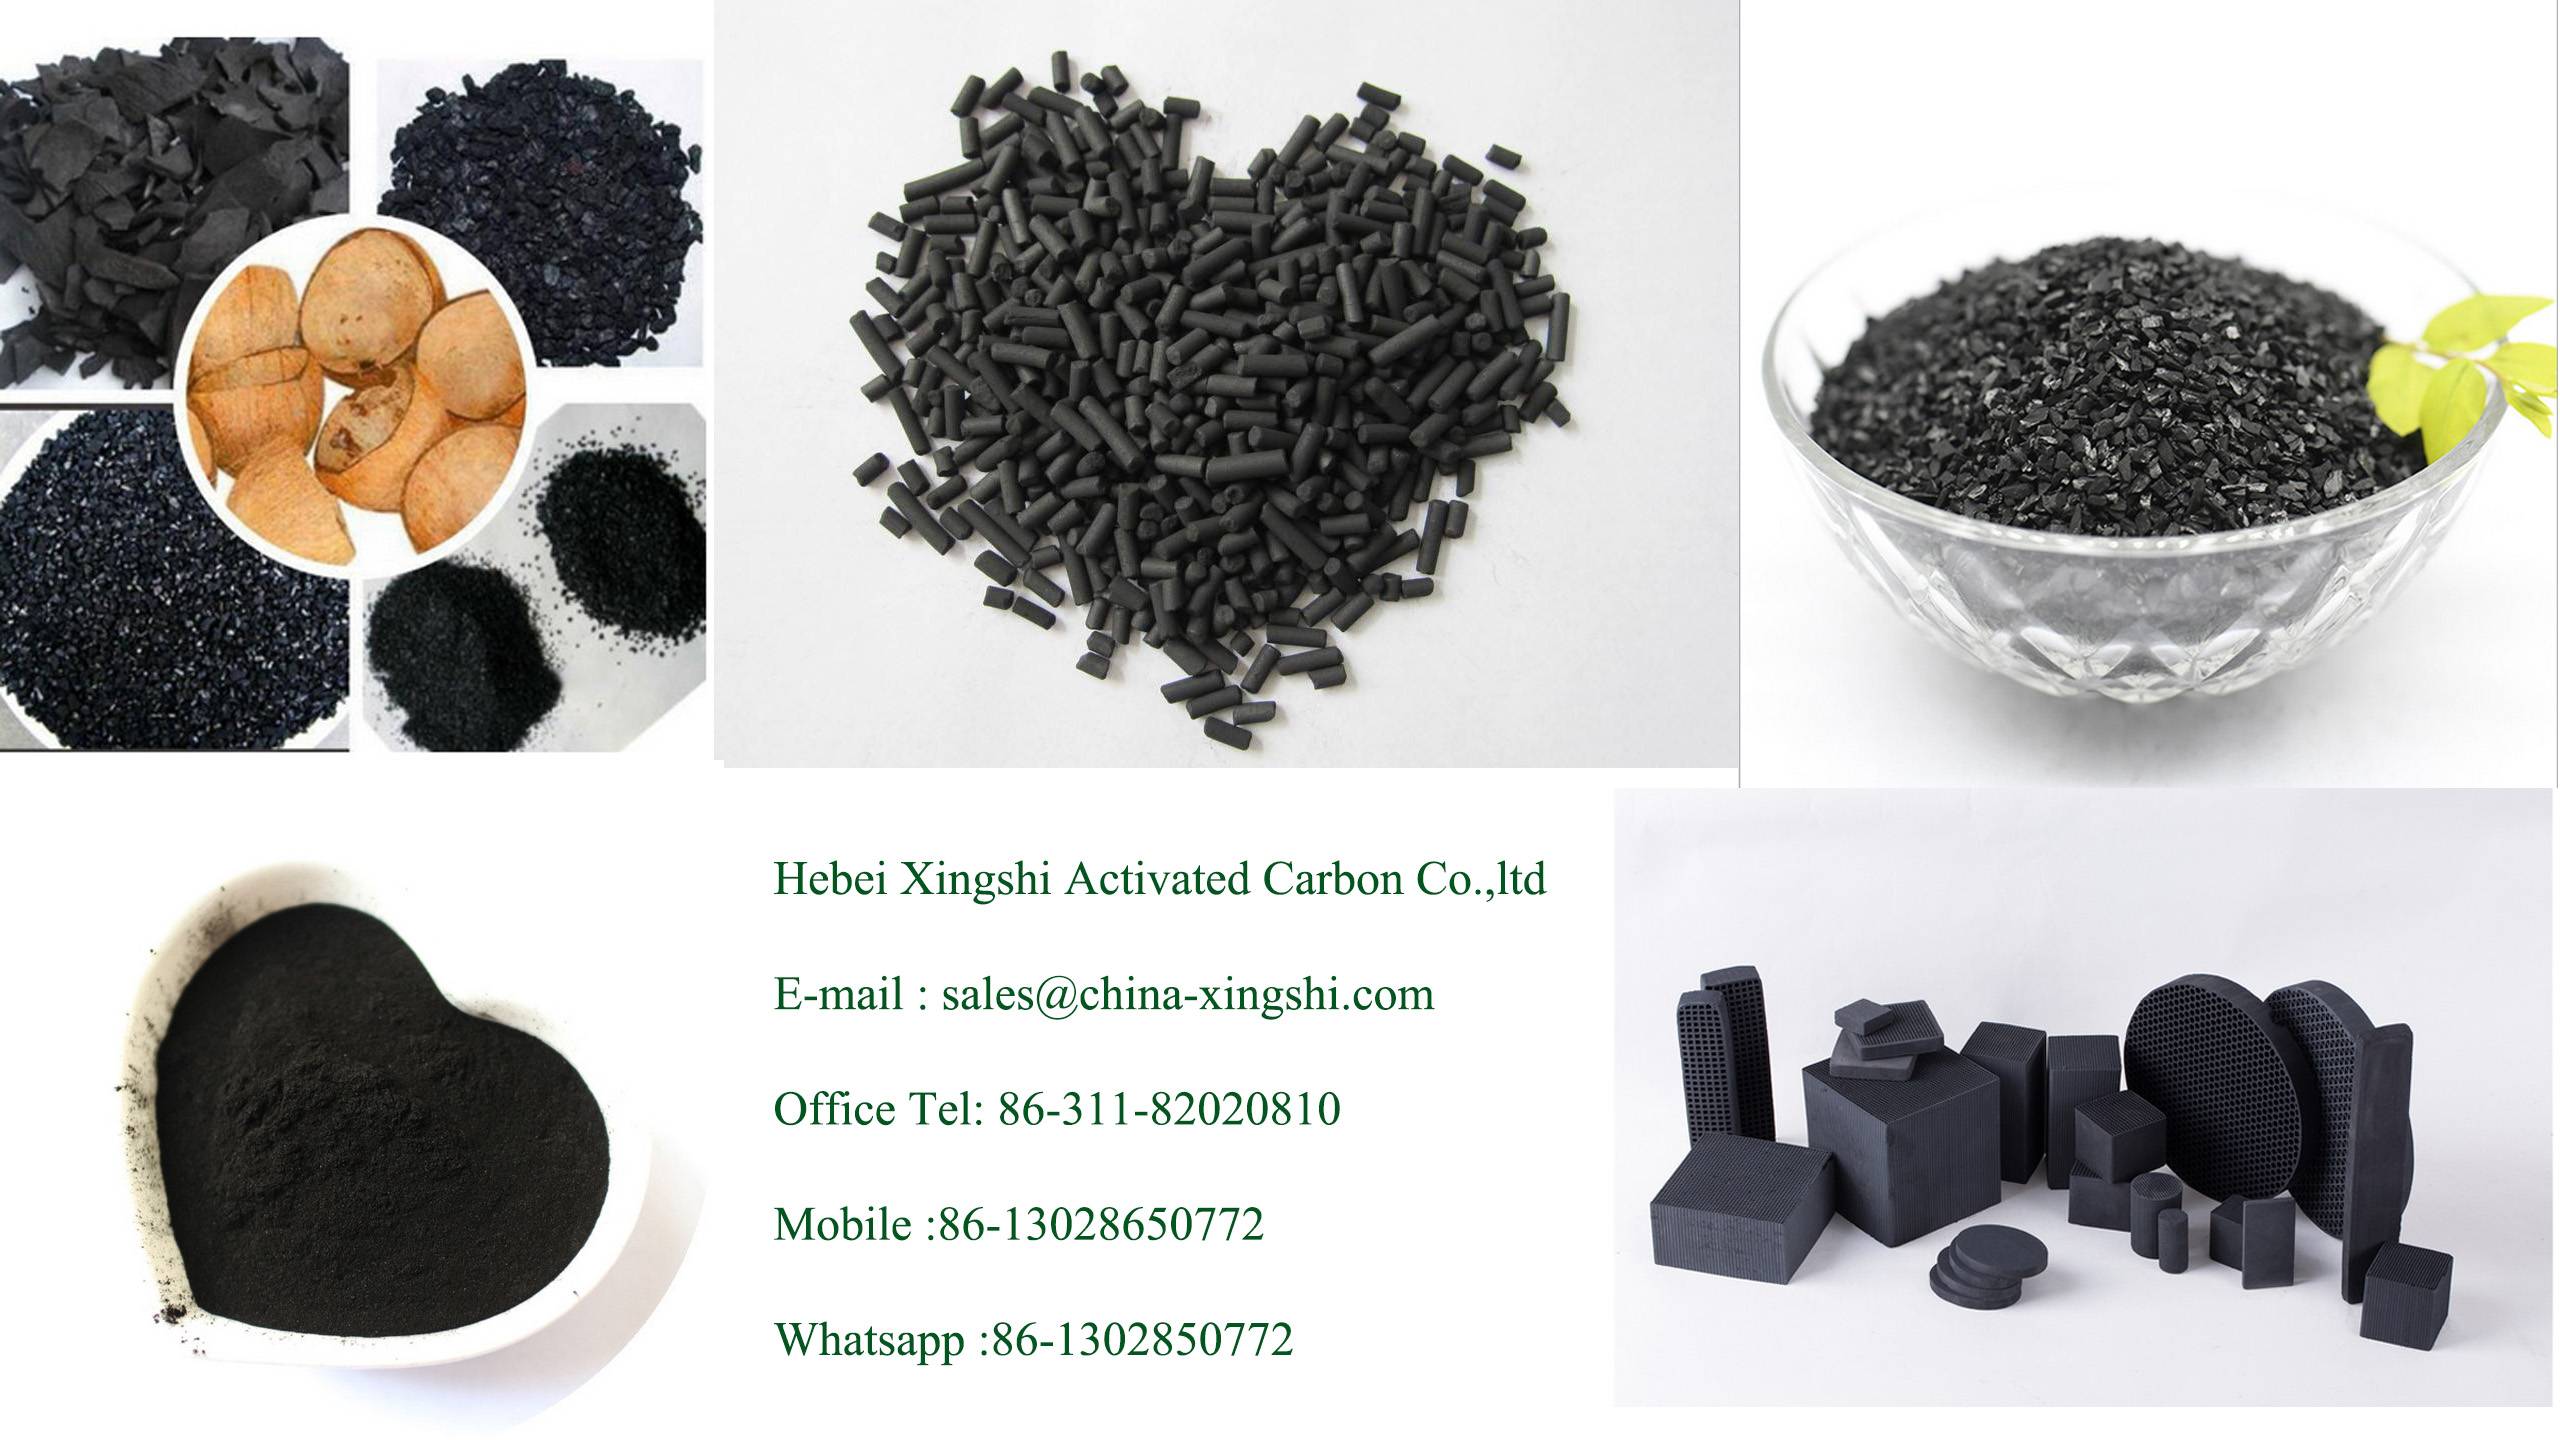 How long is the saturation period of activated carbon?